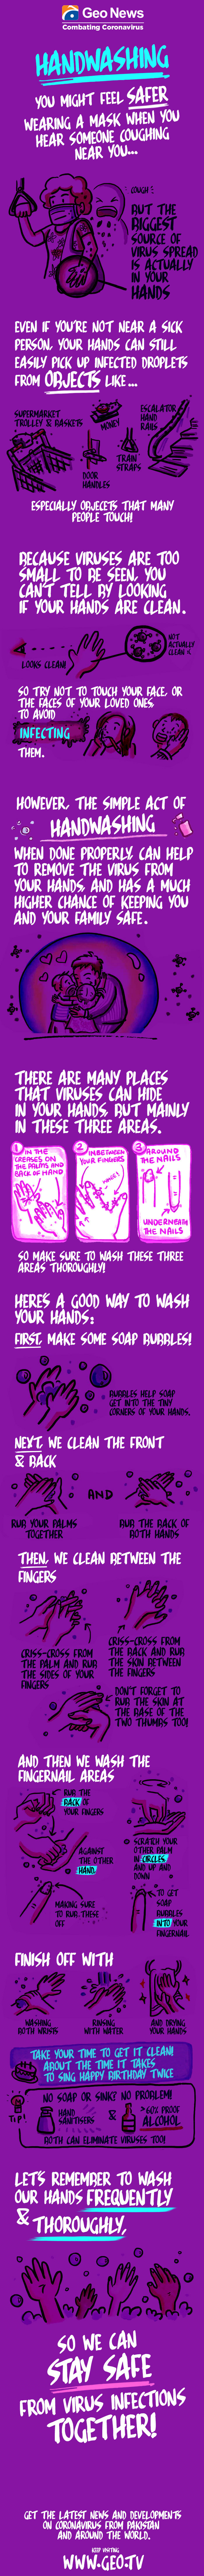 What's the best way to wash your hands?